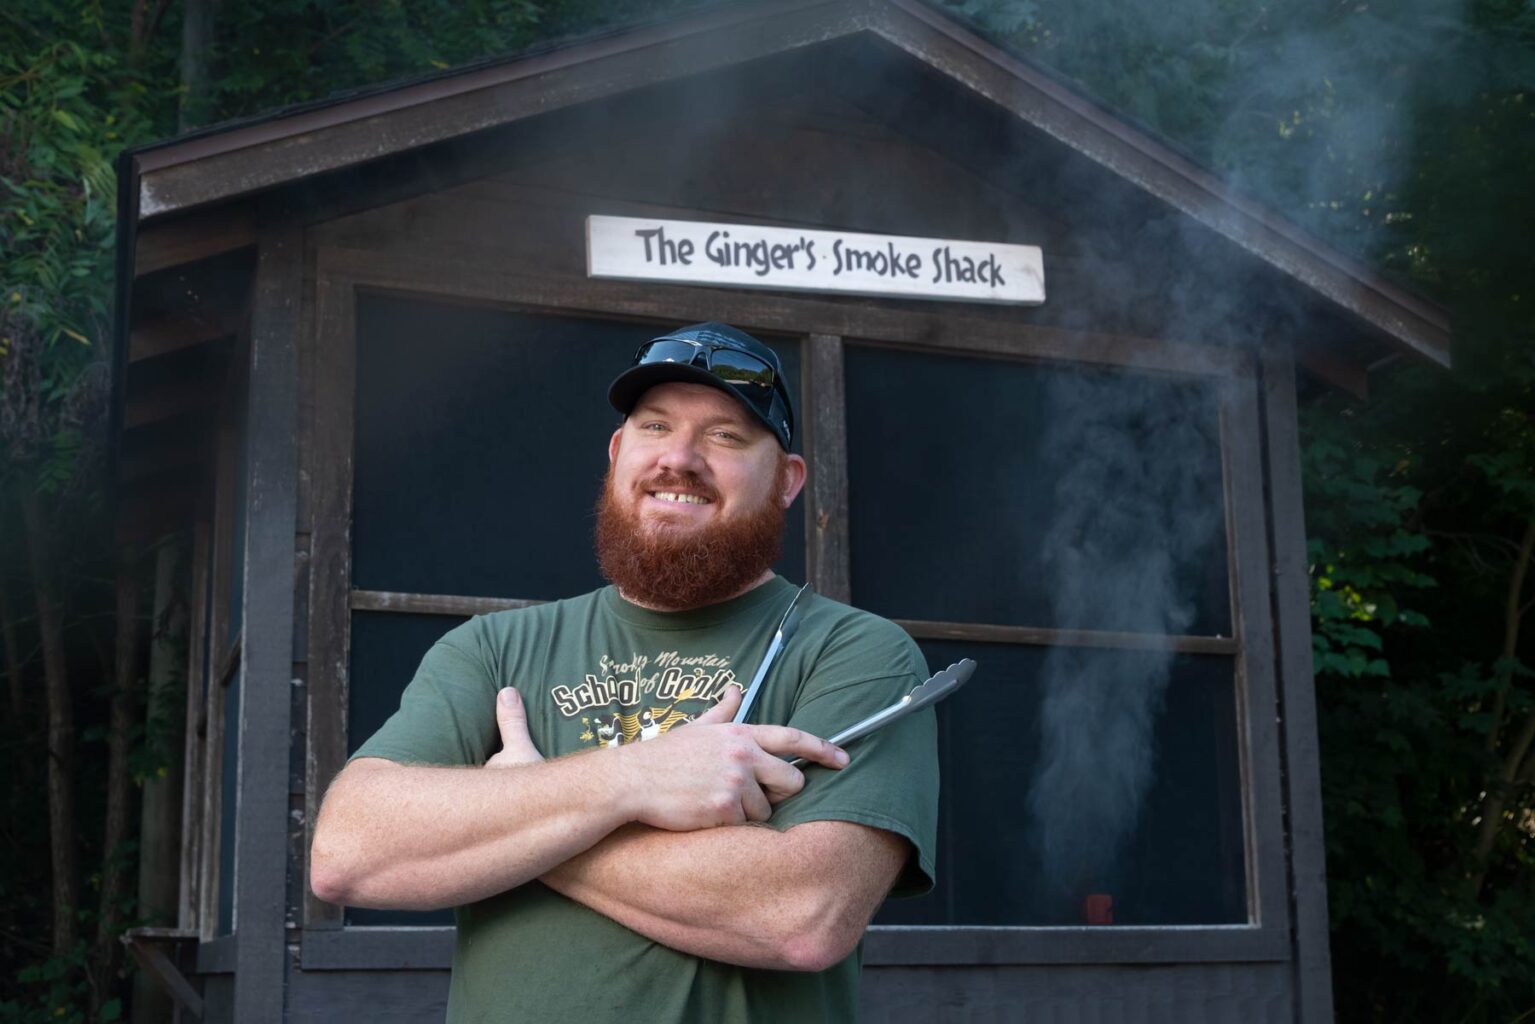 The Smoking Ginger in front of the Smoky Mountain School of Cooking Smoke Shack